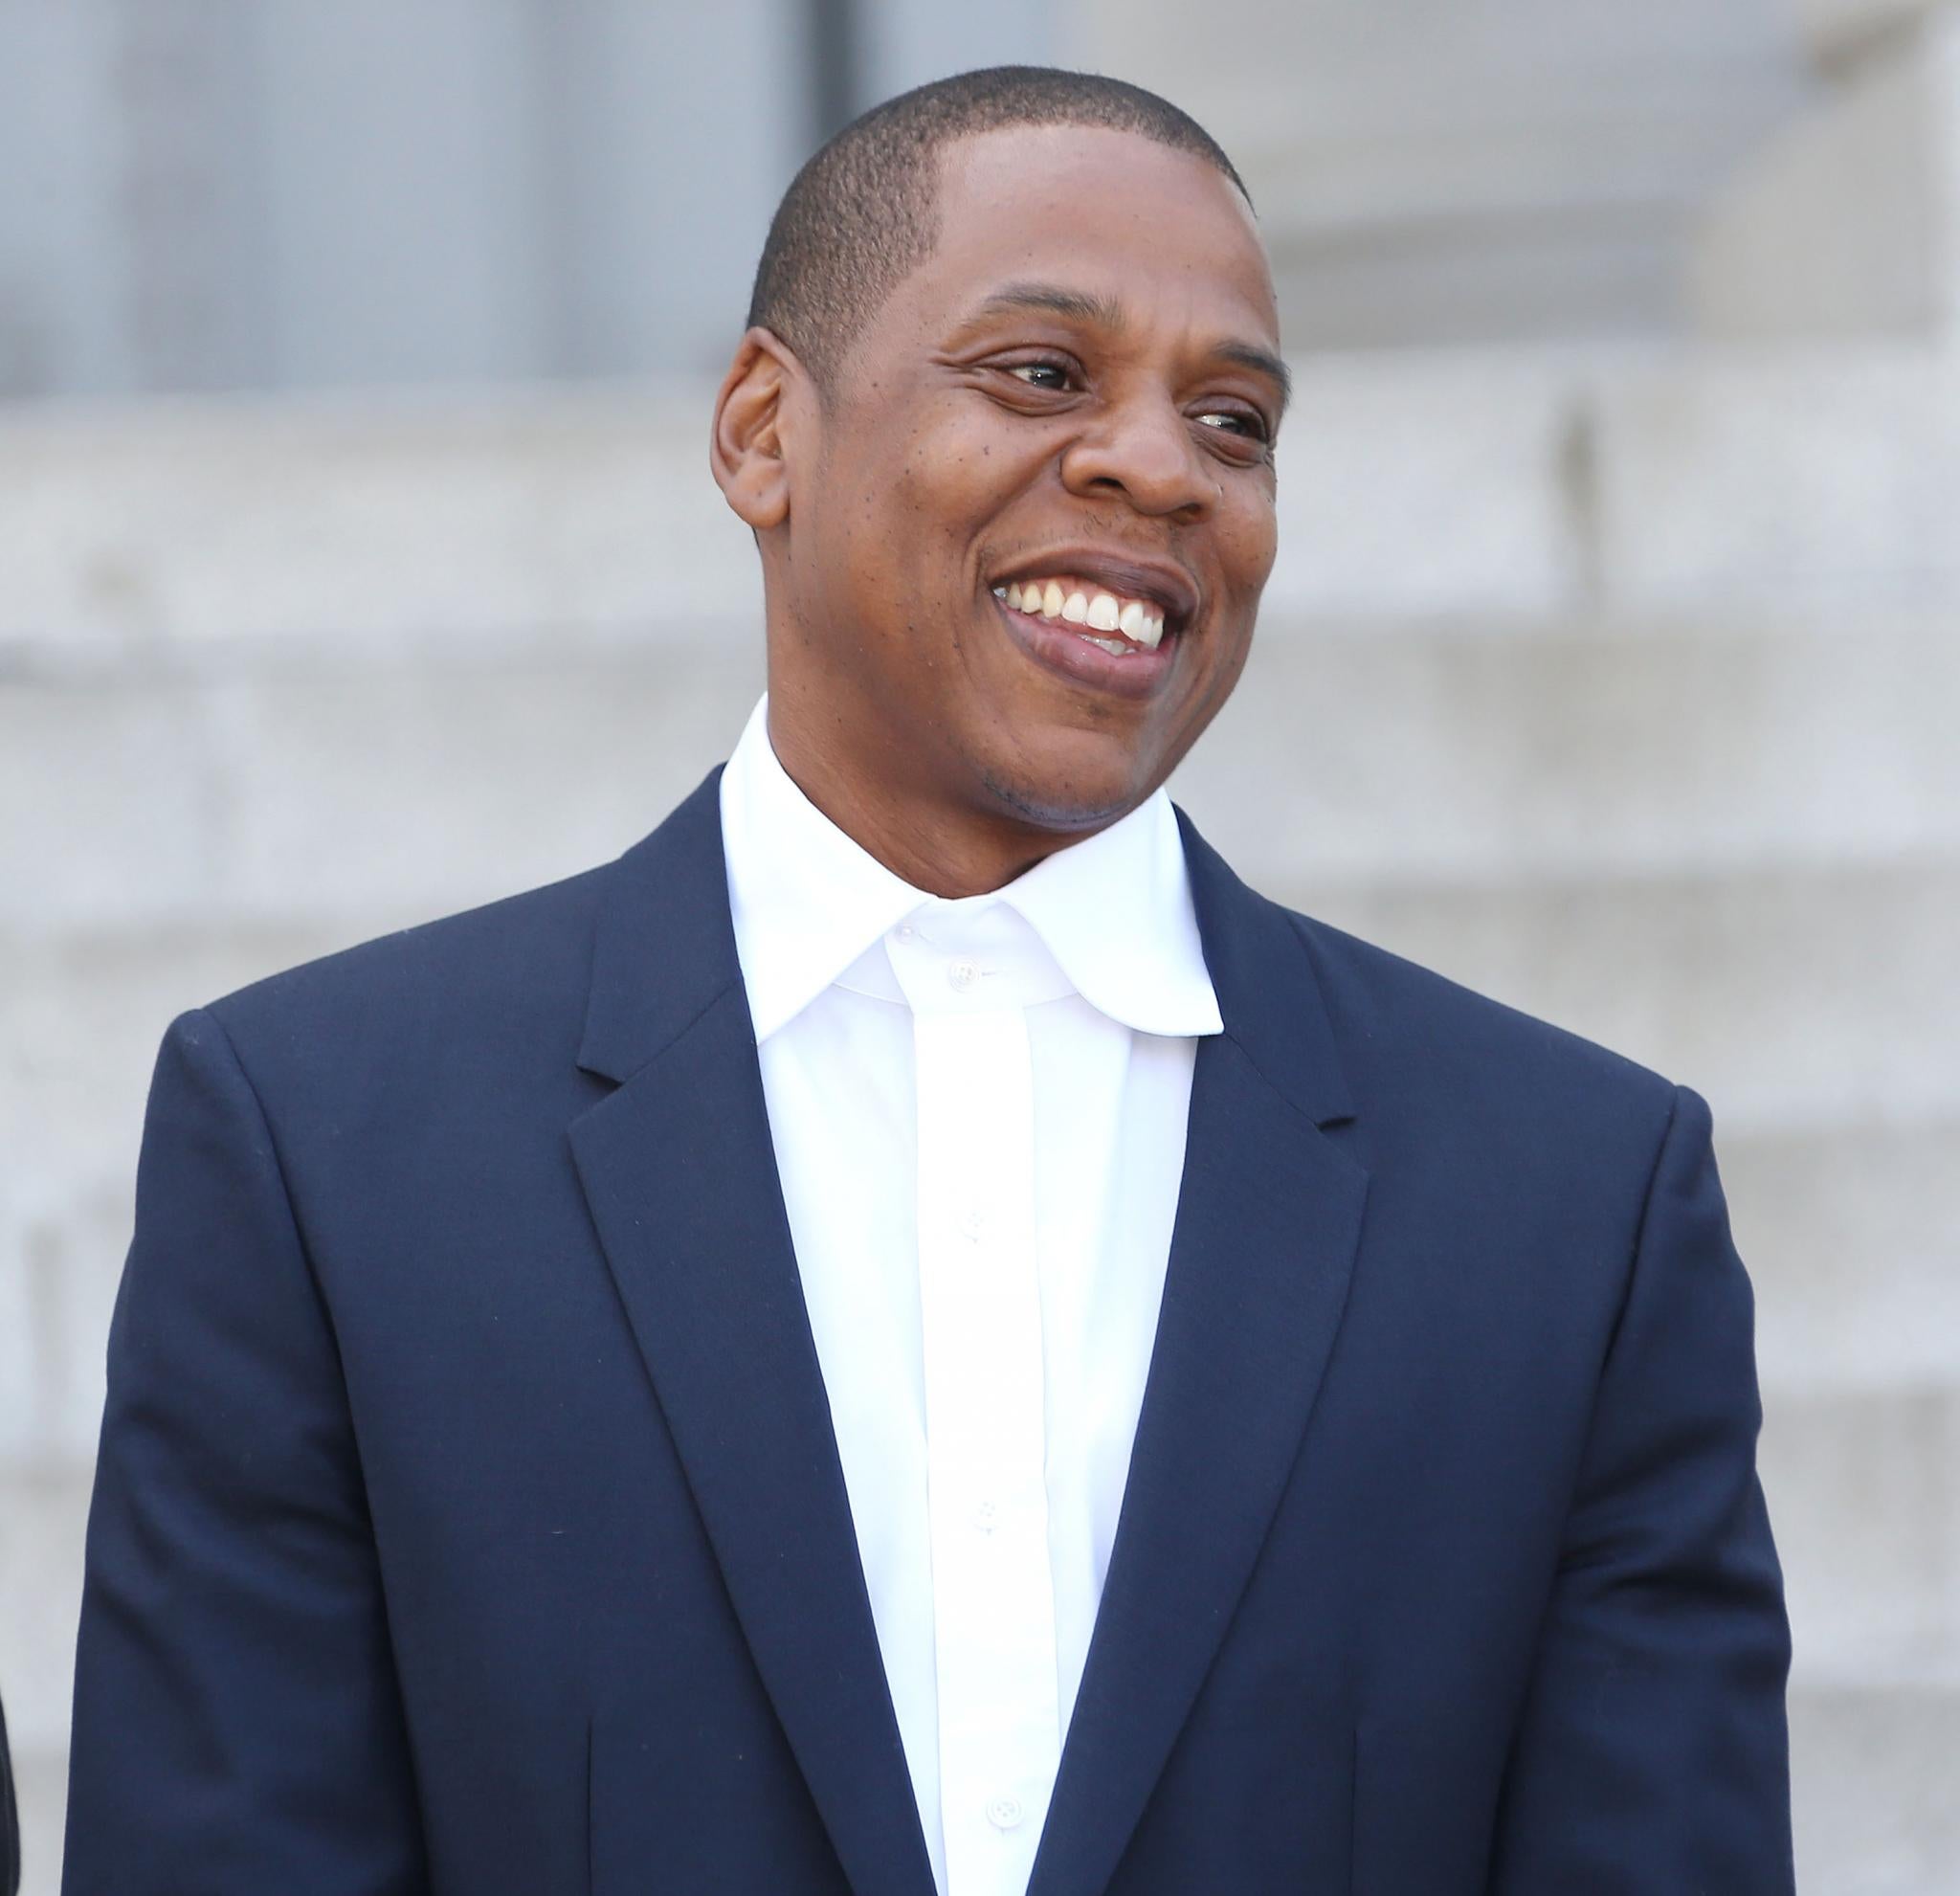 Is Jay Z Really Planning A Response Album To Beyonce's Lemonade?
